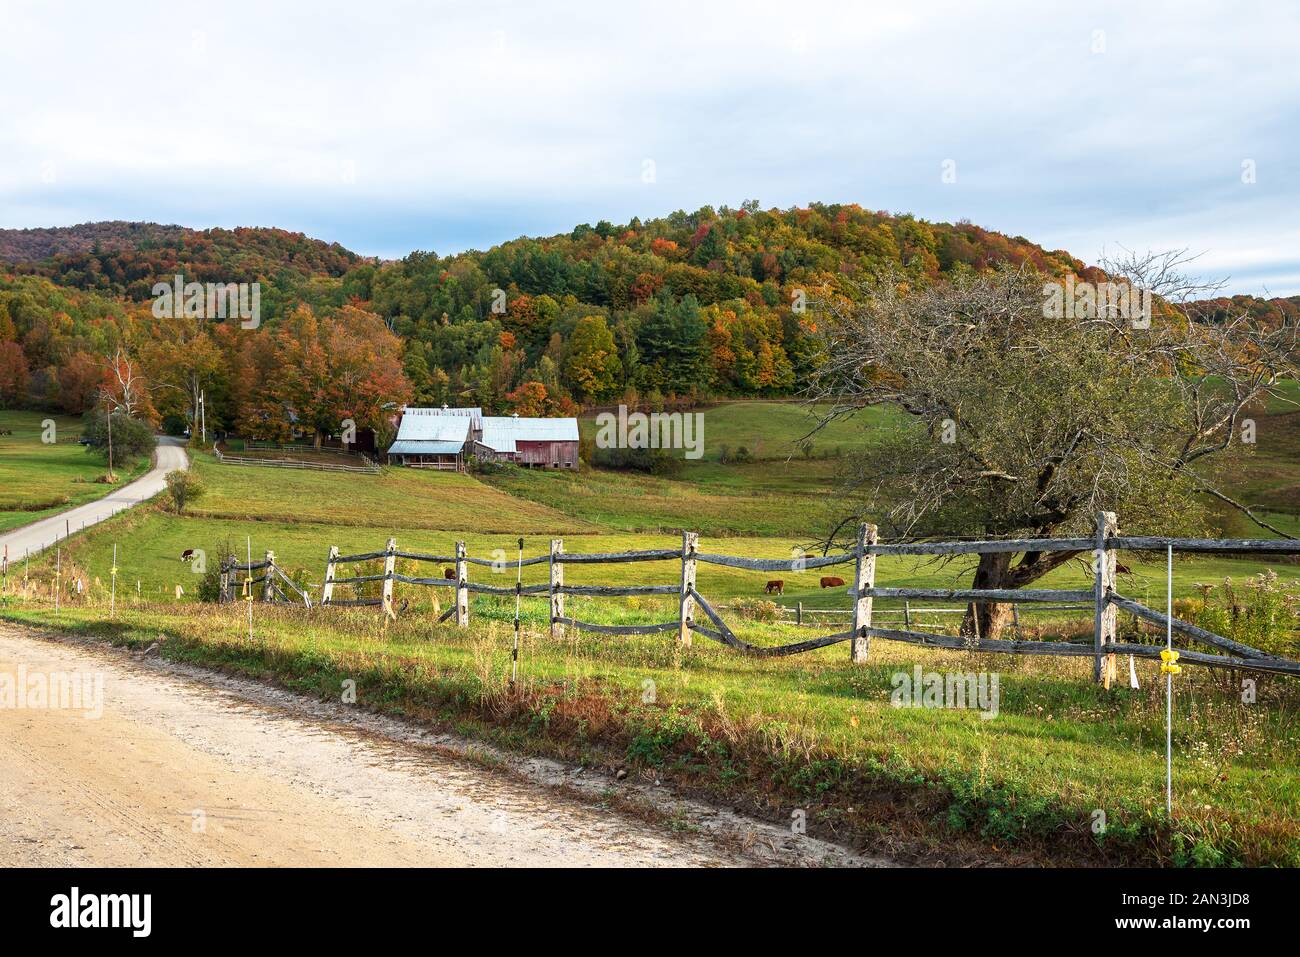 Farm at the foot of a wooded hill on a cloudy autumn day. A fenced grasy field with Cattle is in foreground. Stock Photo